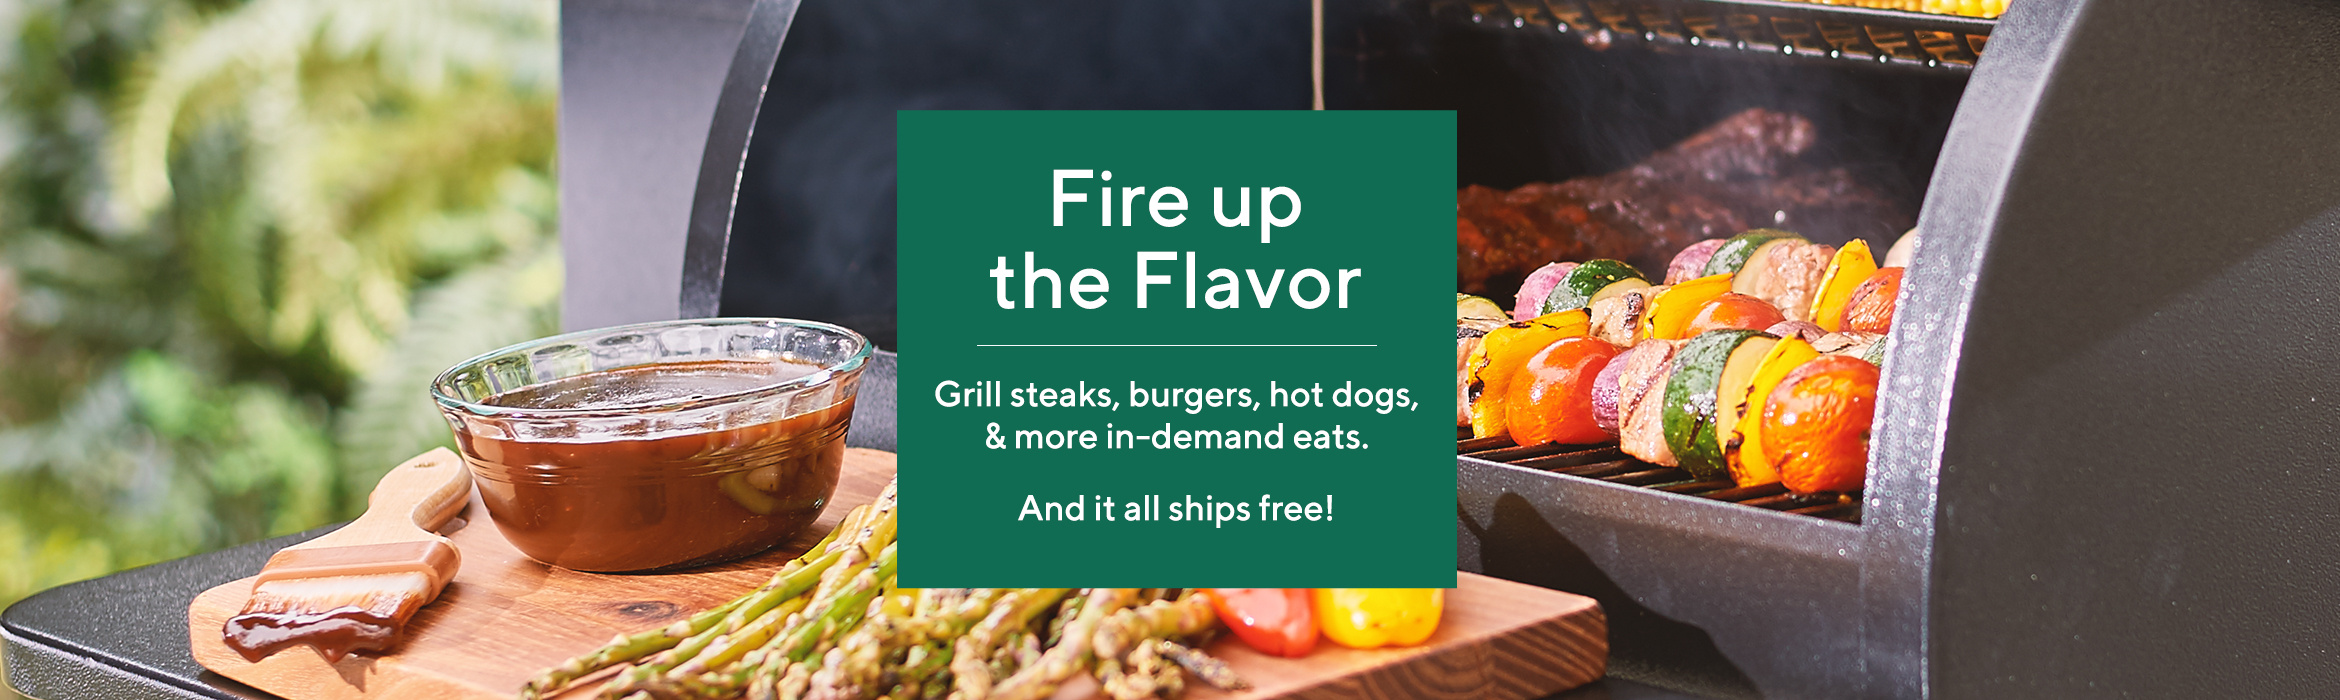 Fire up the Flavor  Grill steaks, burgers, hot dogs, & more in-demand eats.  And it all ships free!